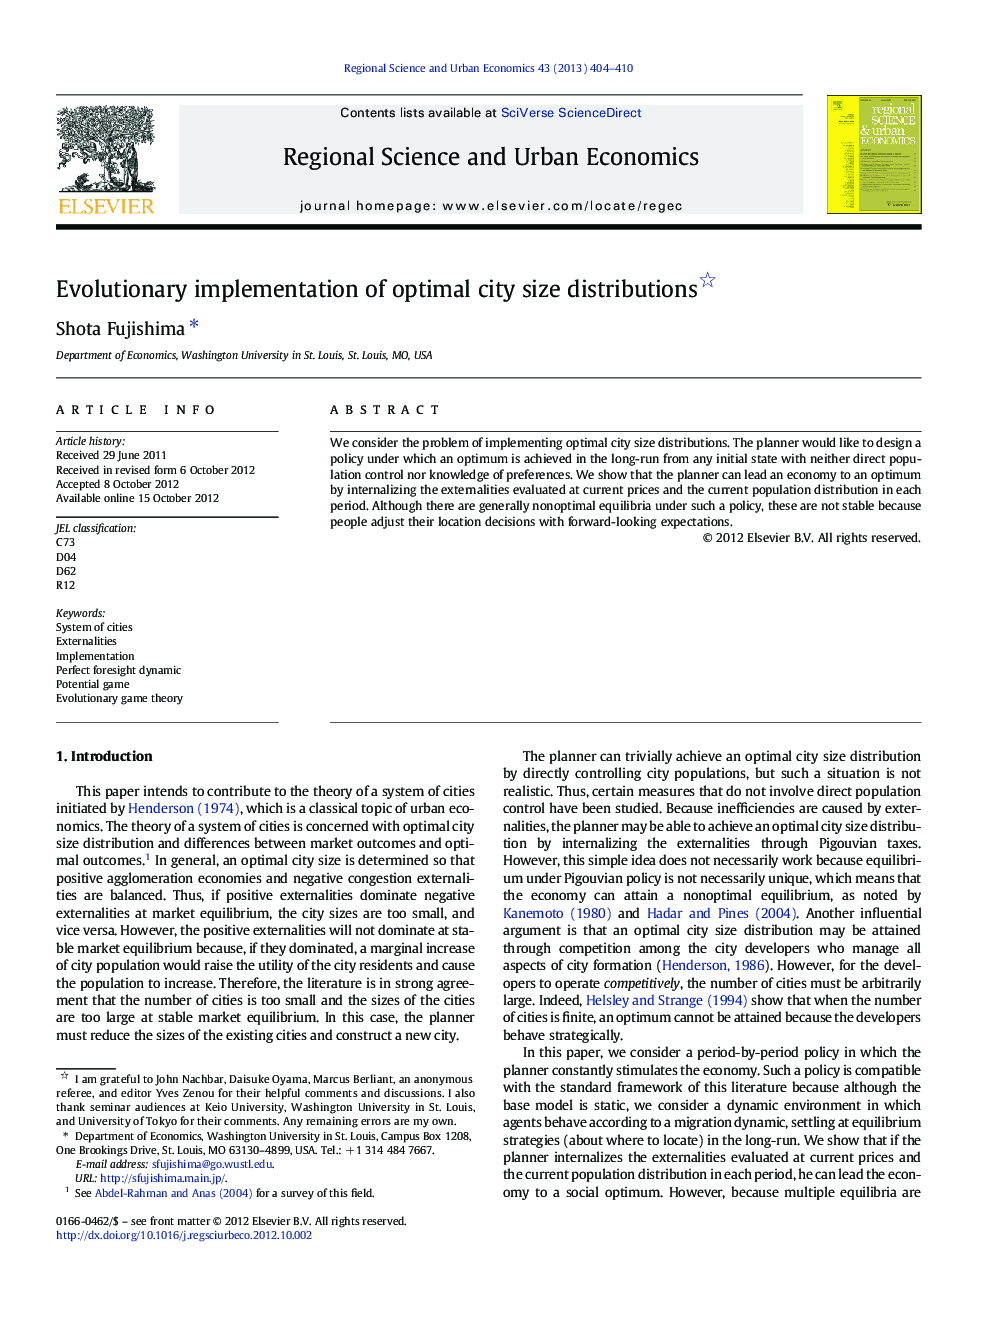 Evolutionary implementation of optimal city size distributions 